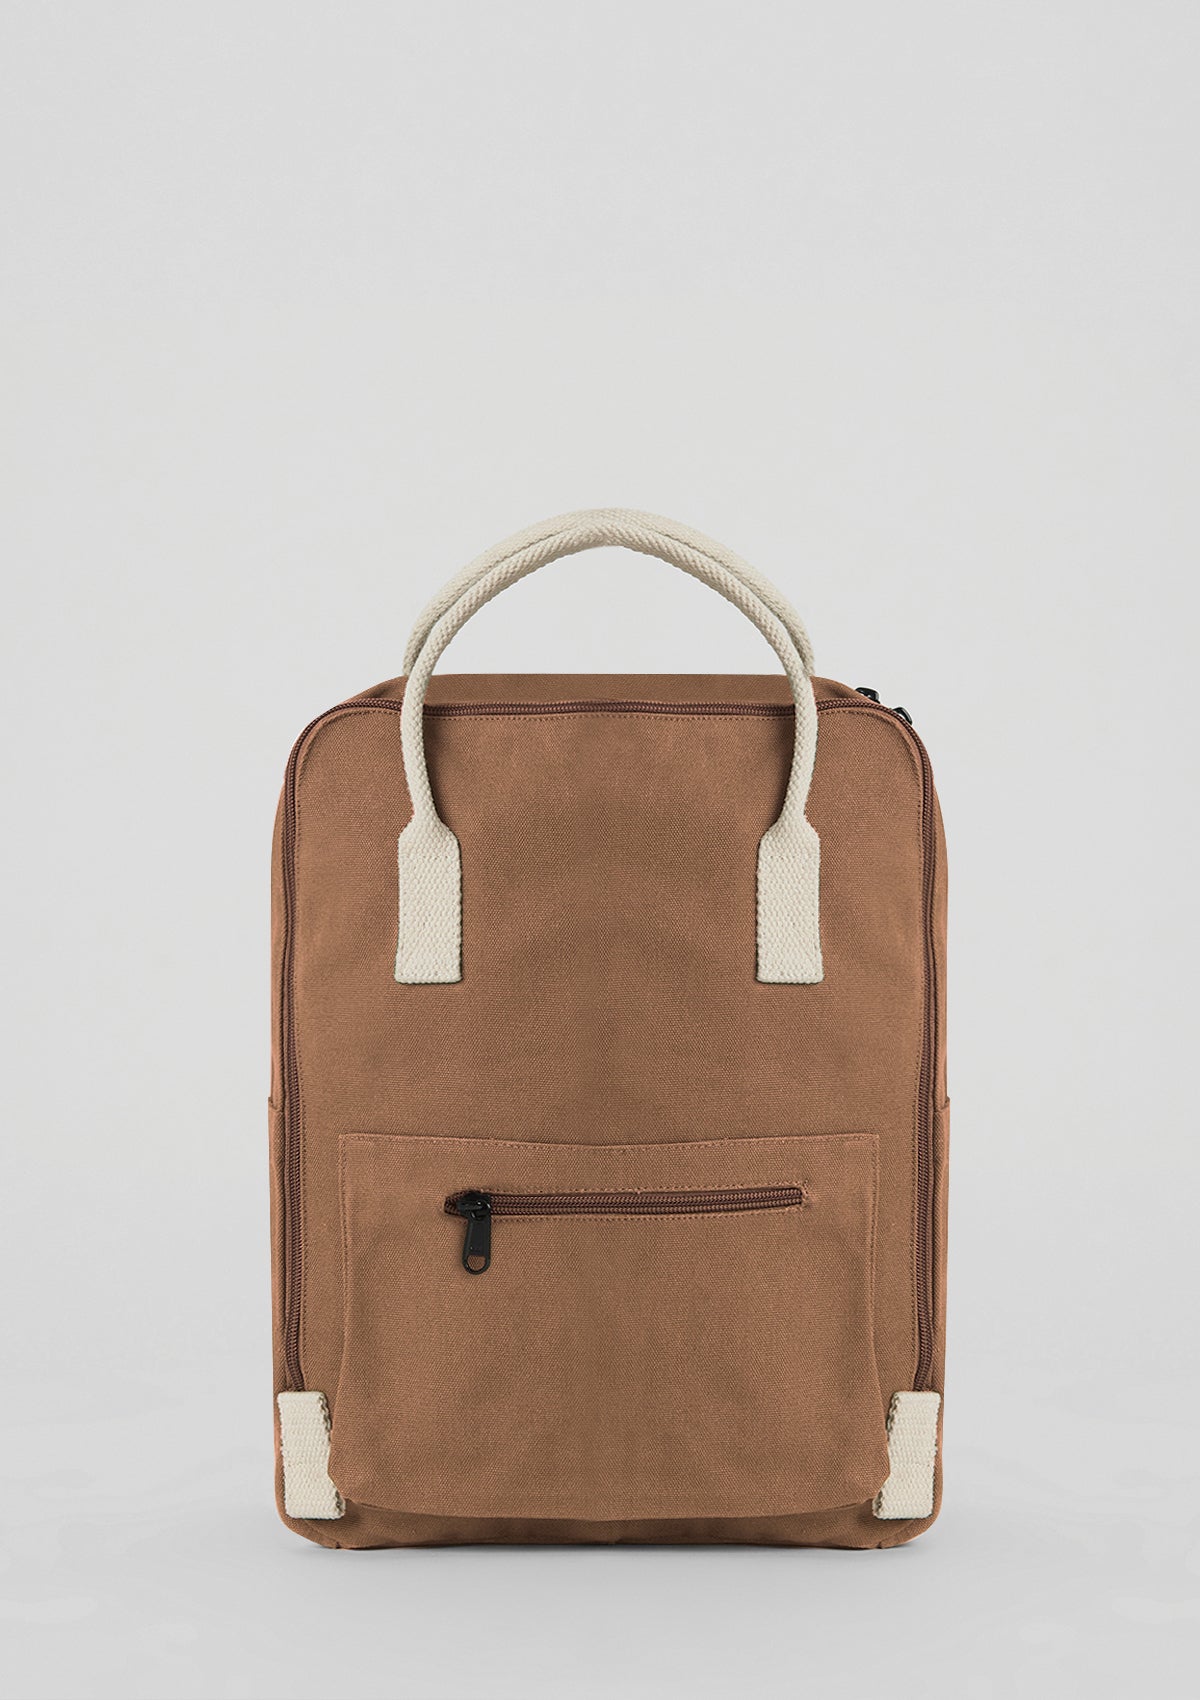 Cappuccino Brown Laptop Bag for Men and Women